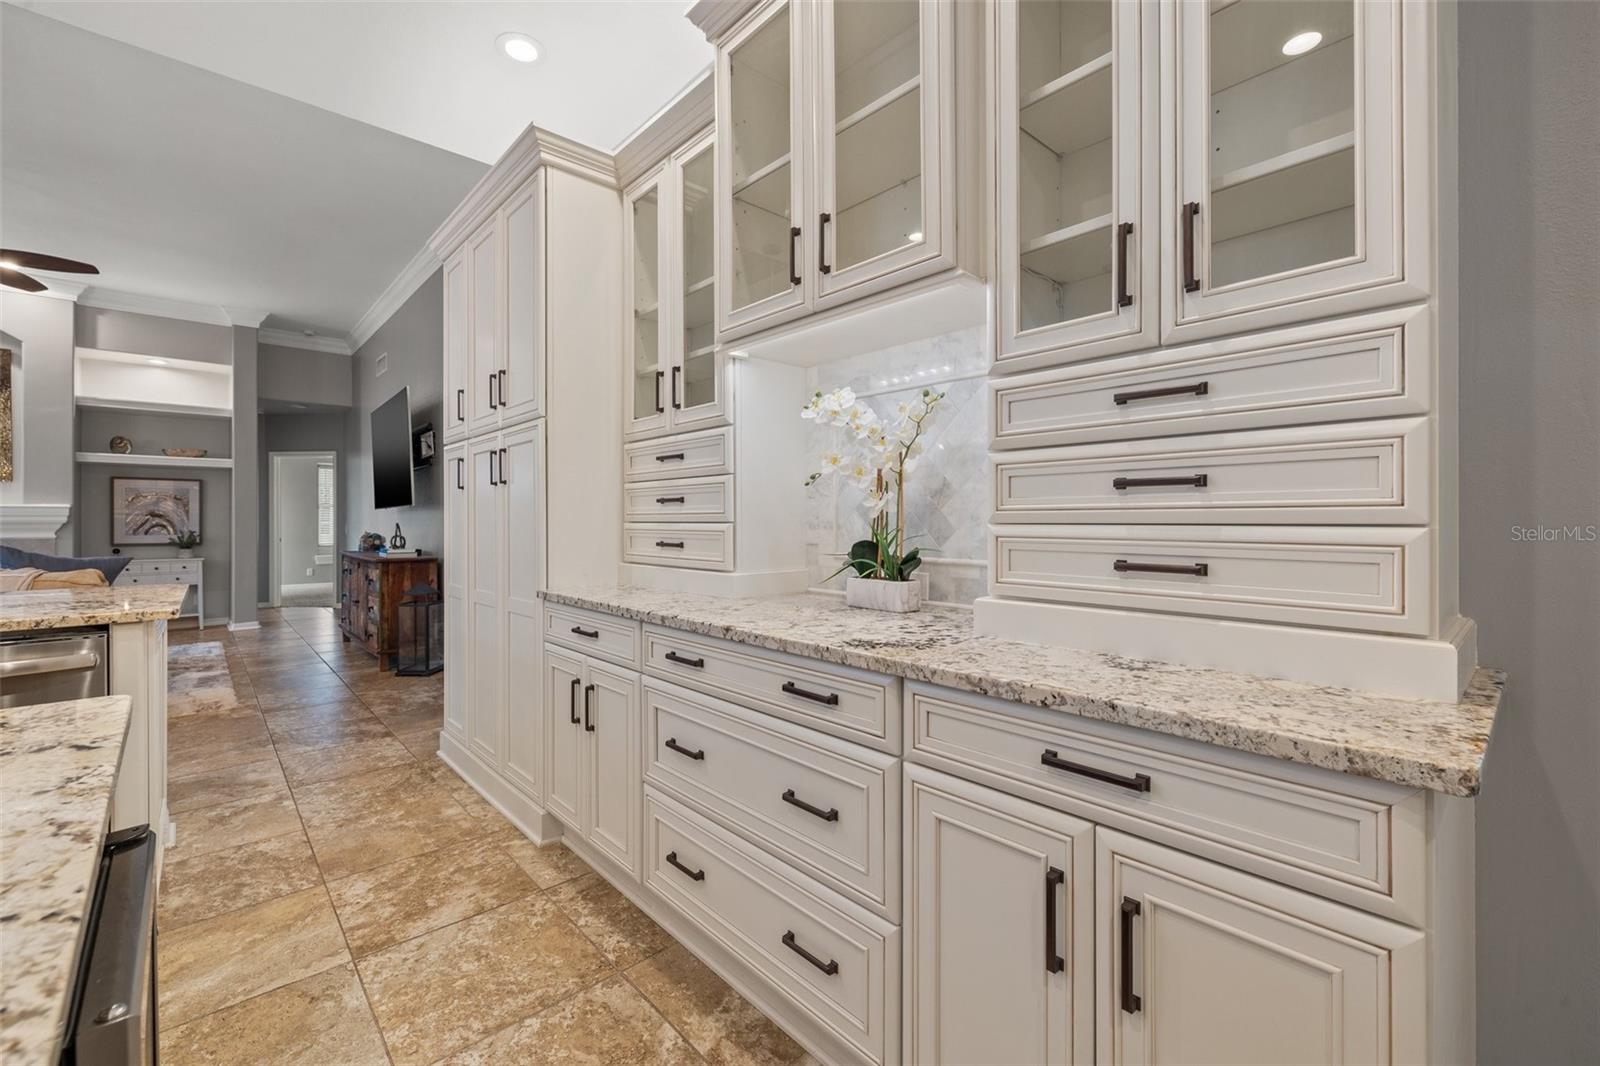 custom designed hutch in the kitchen with marble back splash.